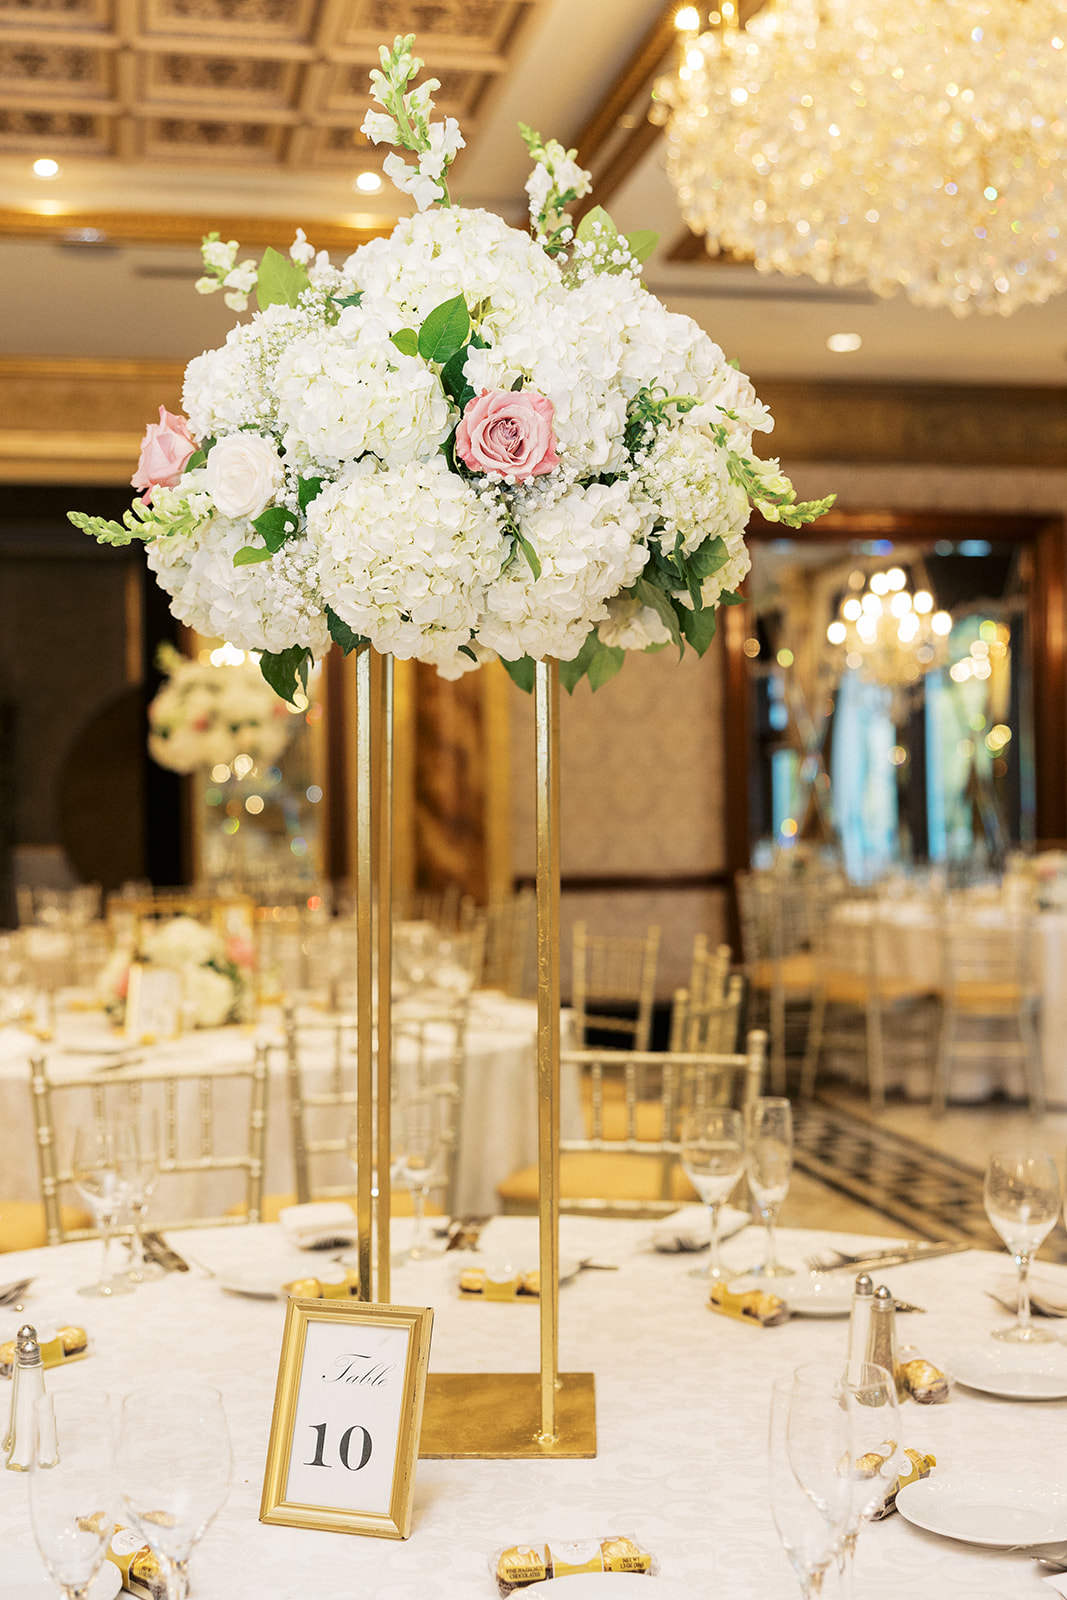 Details of a table setting center piece with gold hardware and white and pink flowers